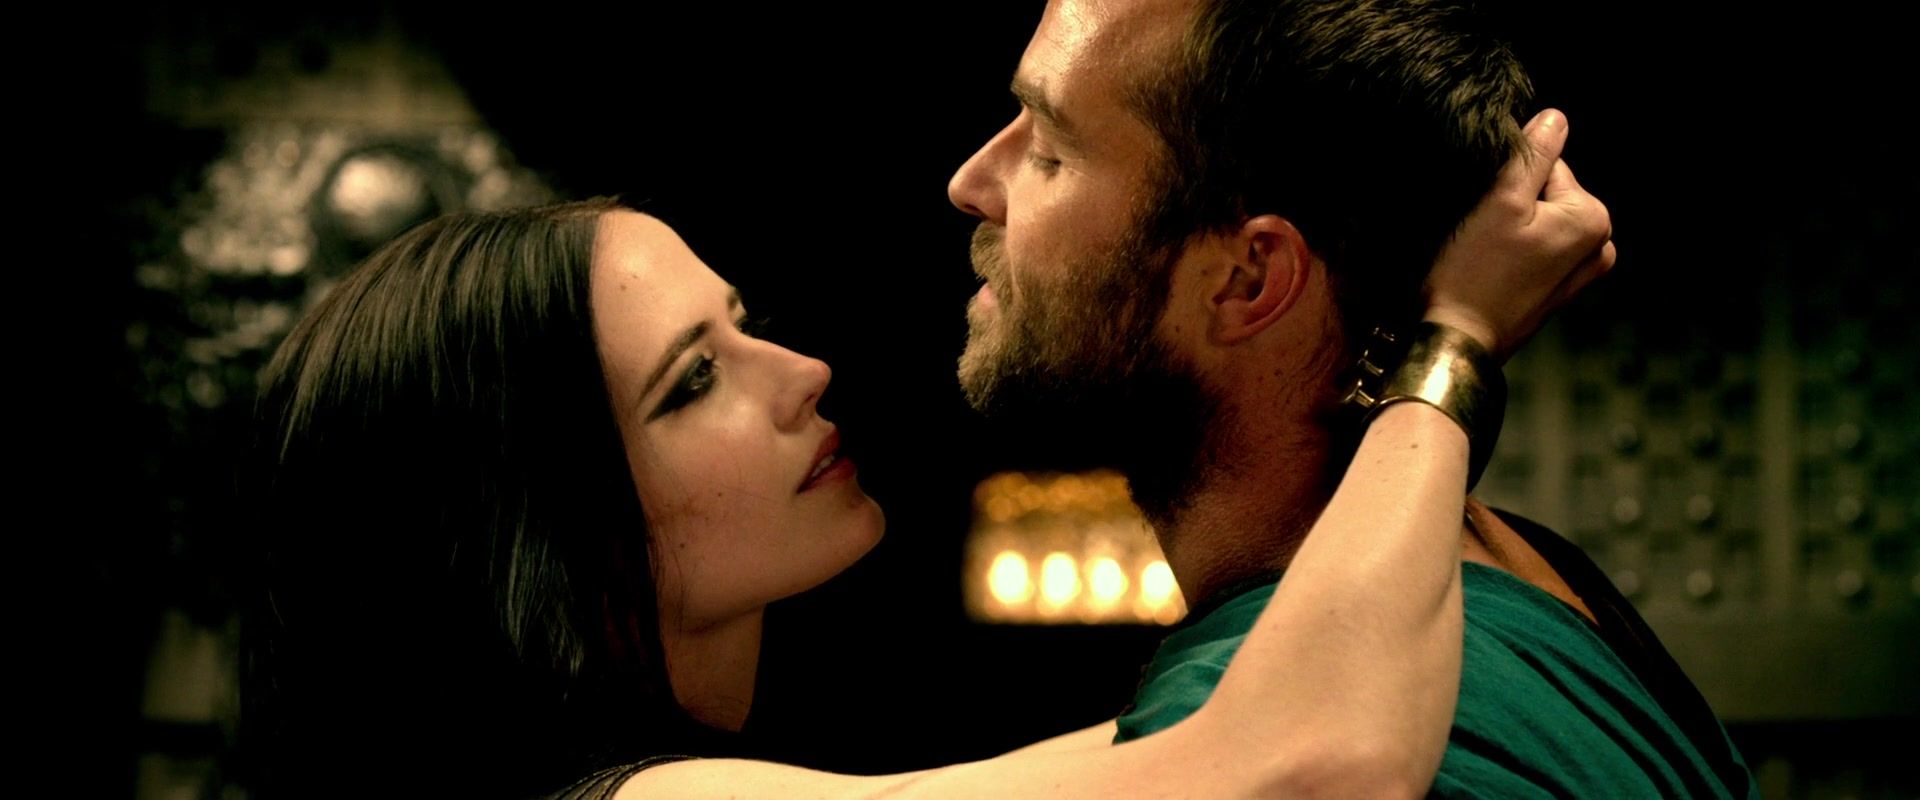 Doggy Style Eva Green - 300. Rise of an Empire (2014) Prostitute